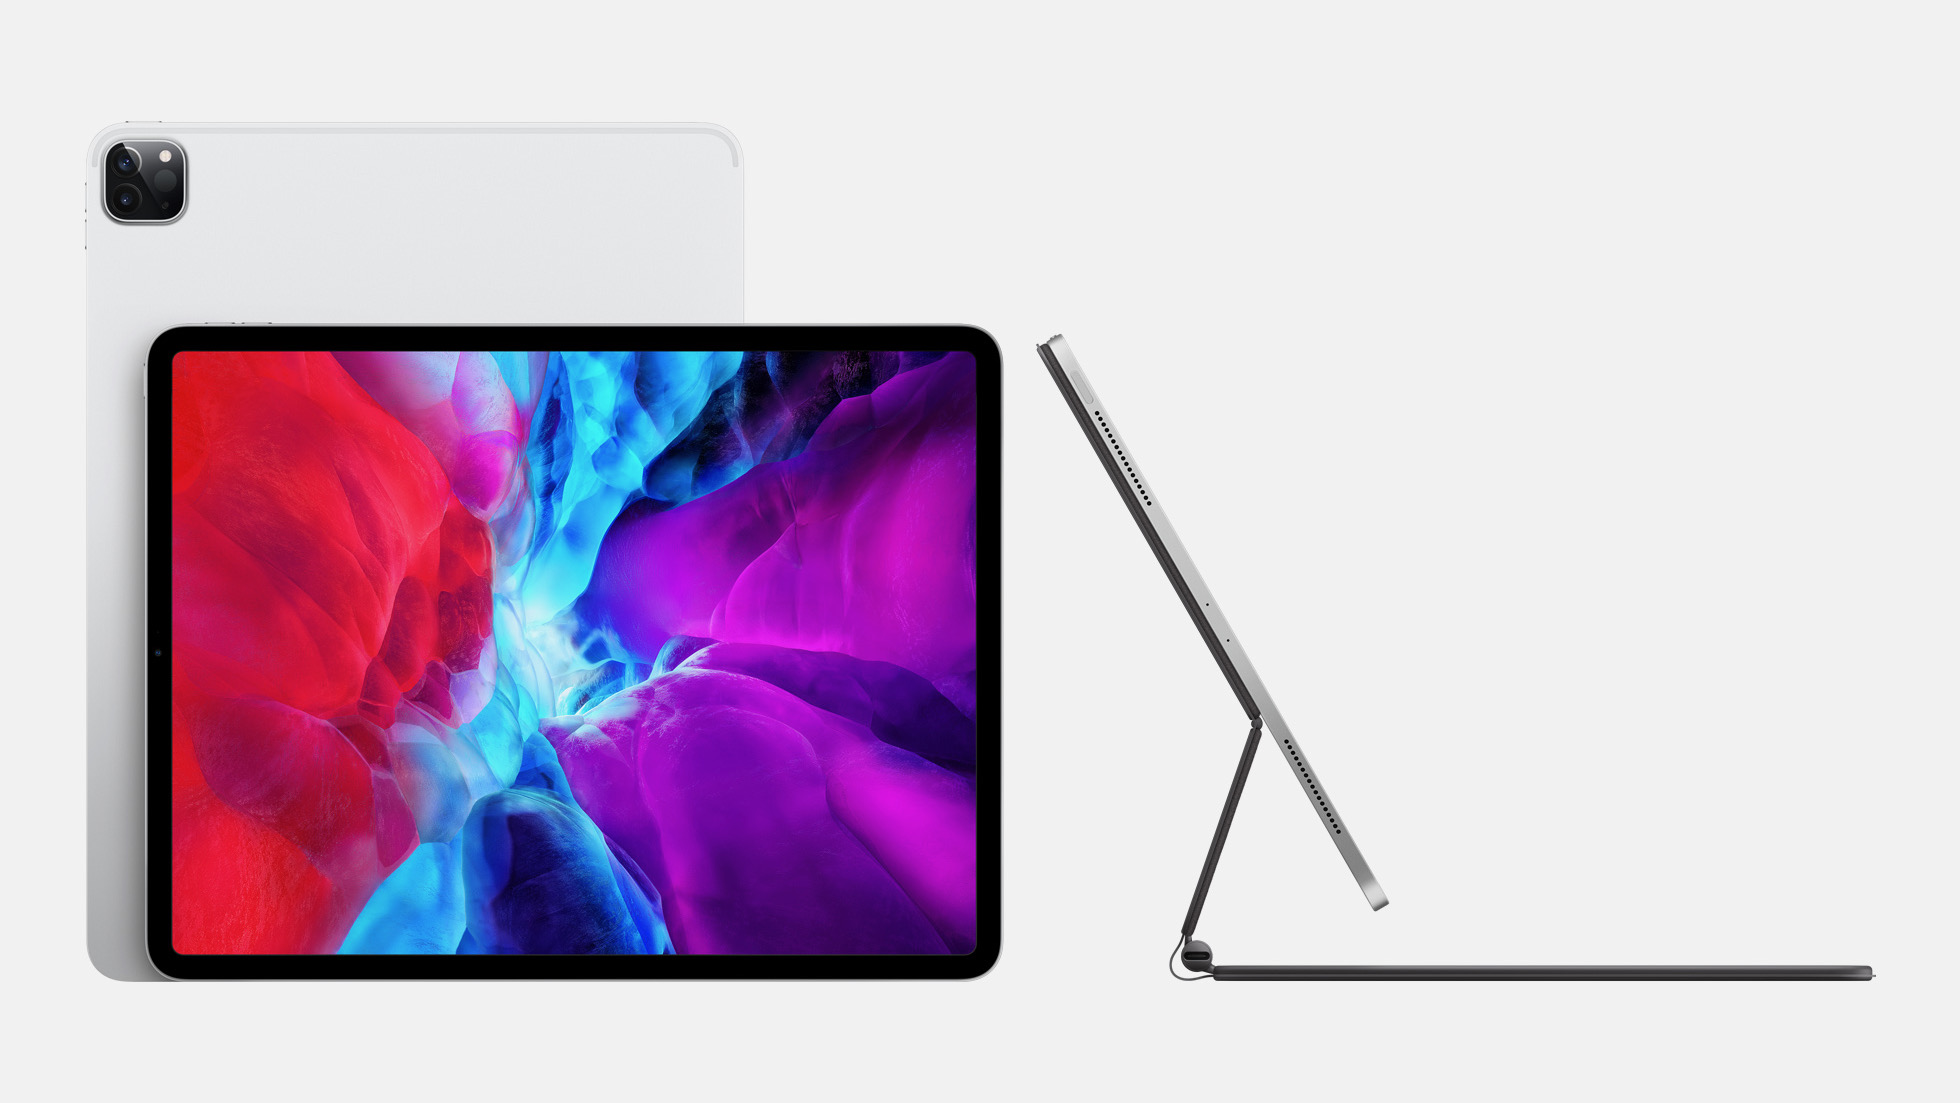 New Apple iPad to get OLED displays from 2022, claims report | What Hi-Fi?